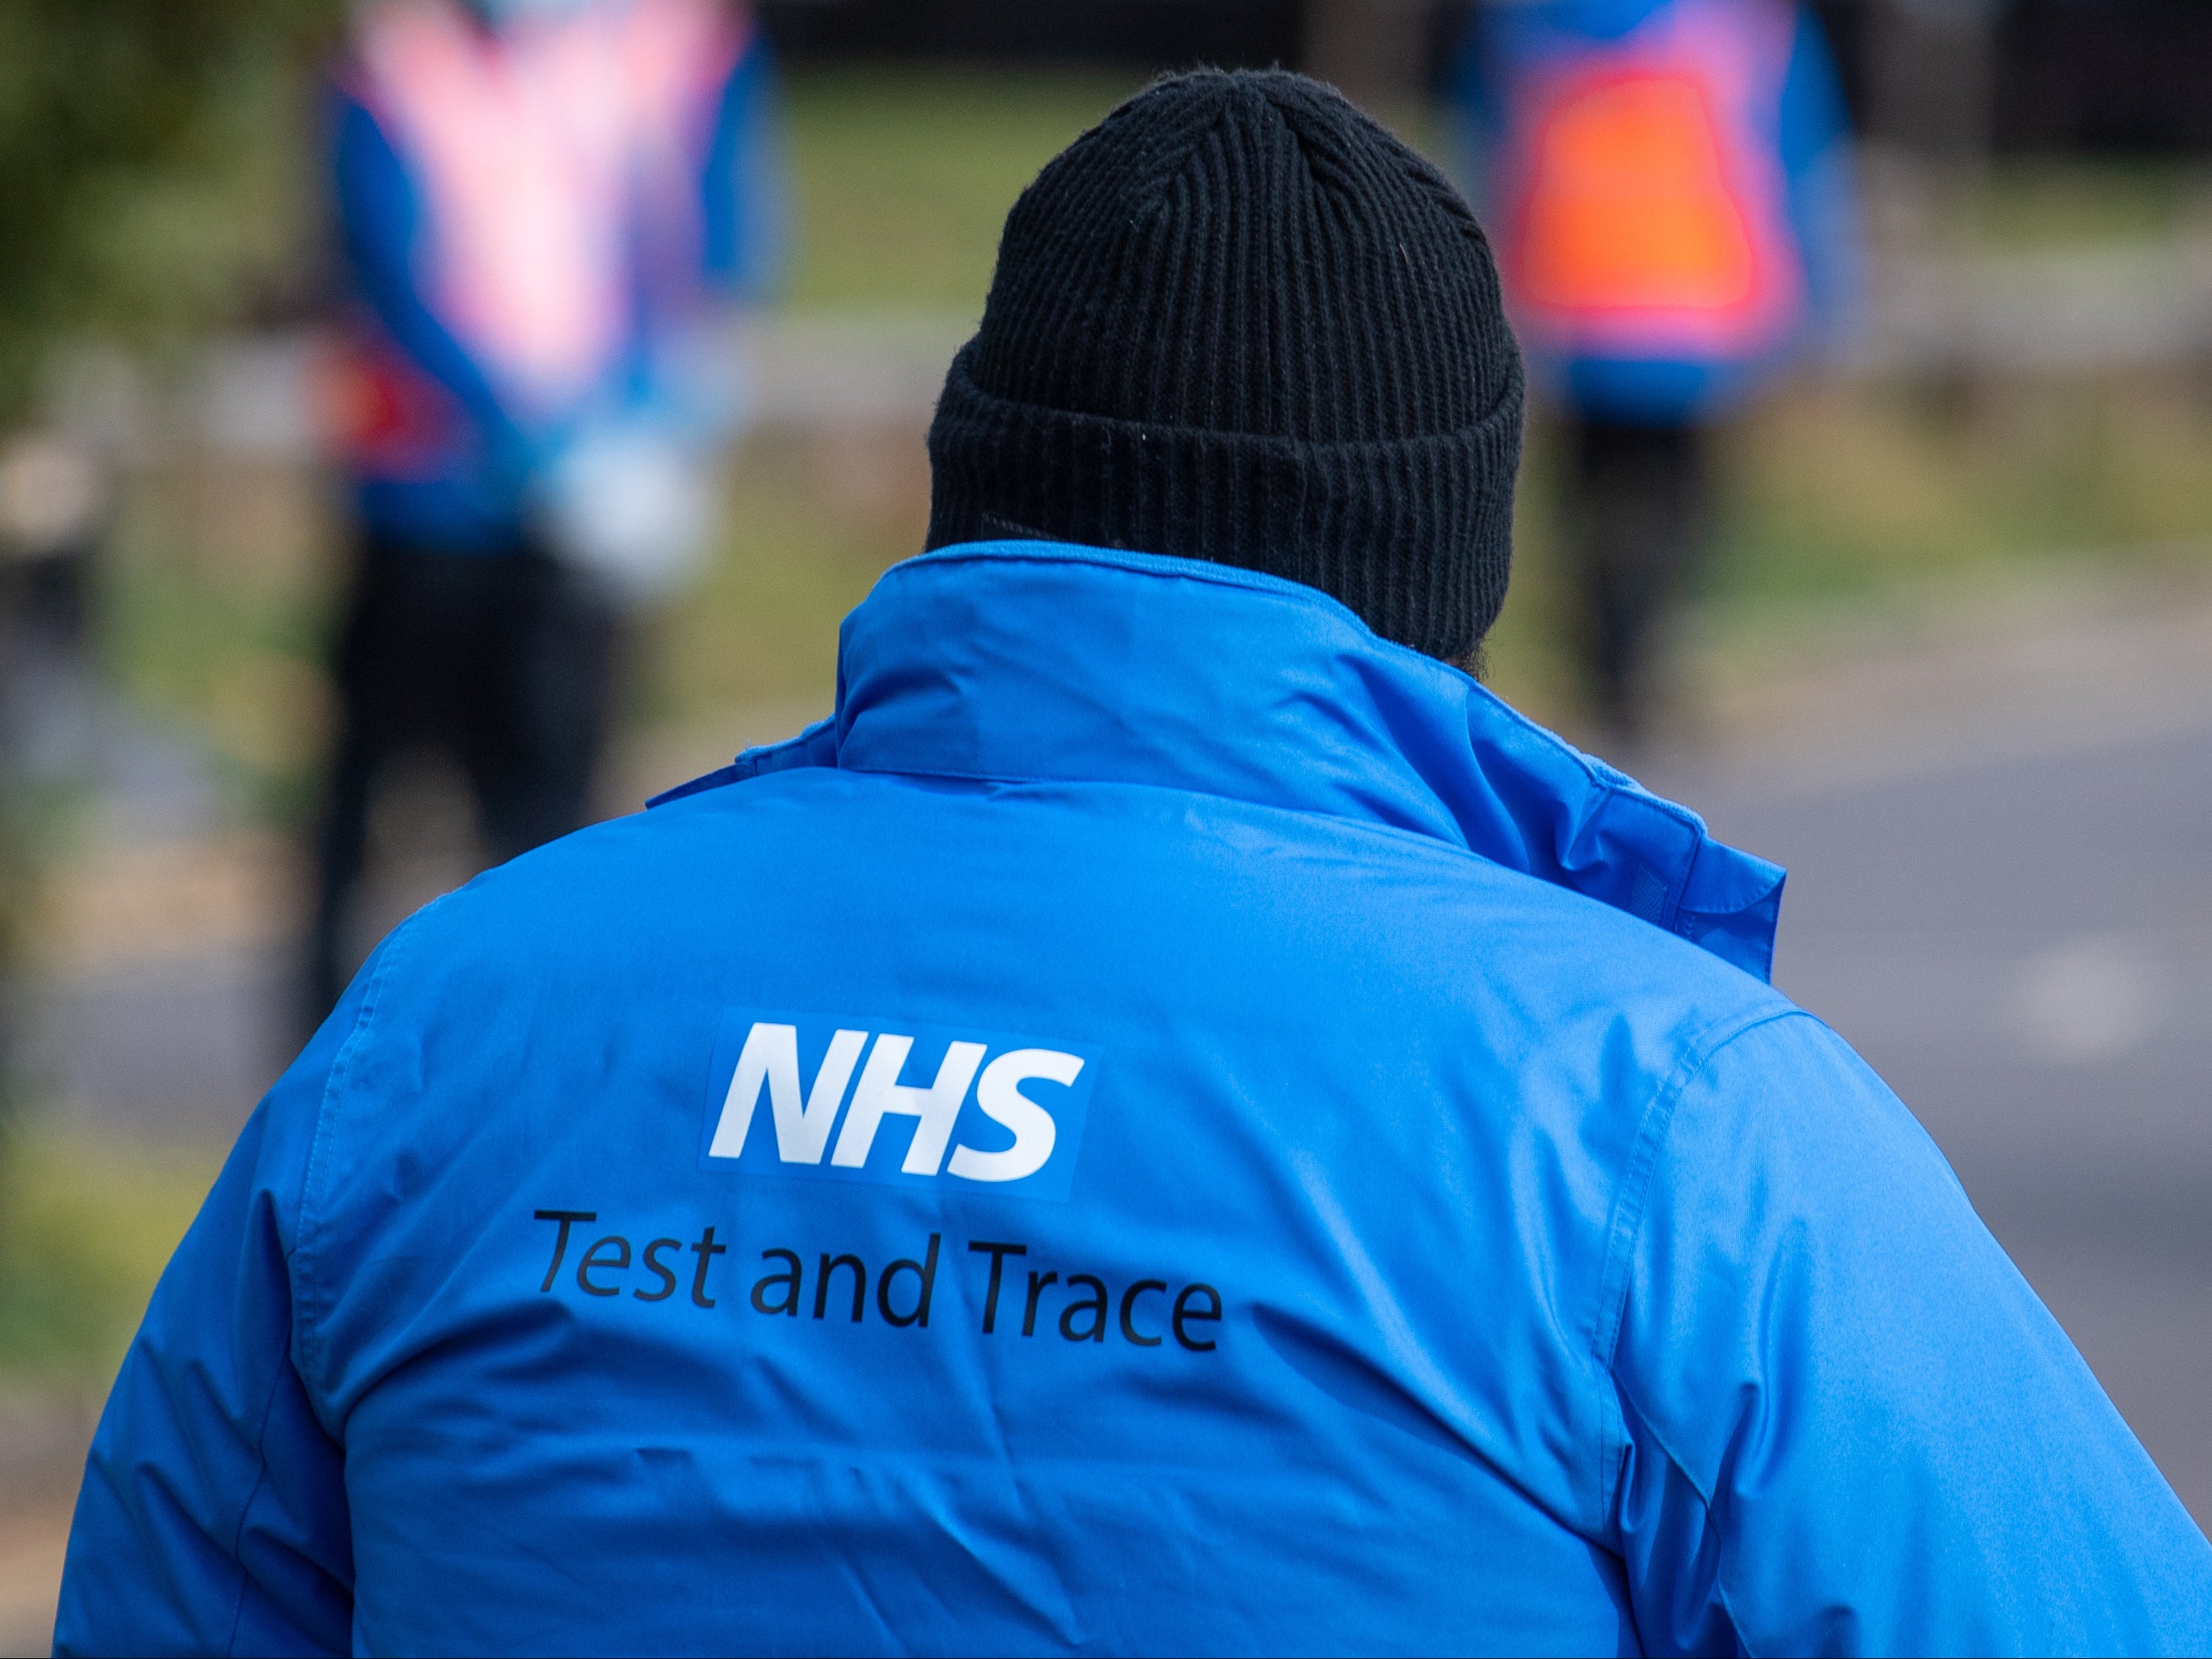 Thousands of clinical staff are to lose their jobs at the test and trace service